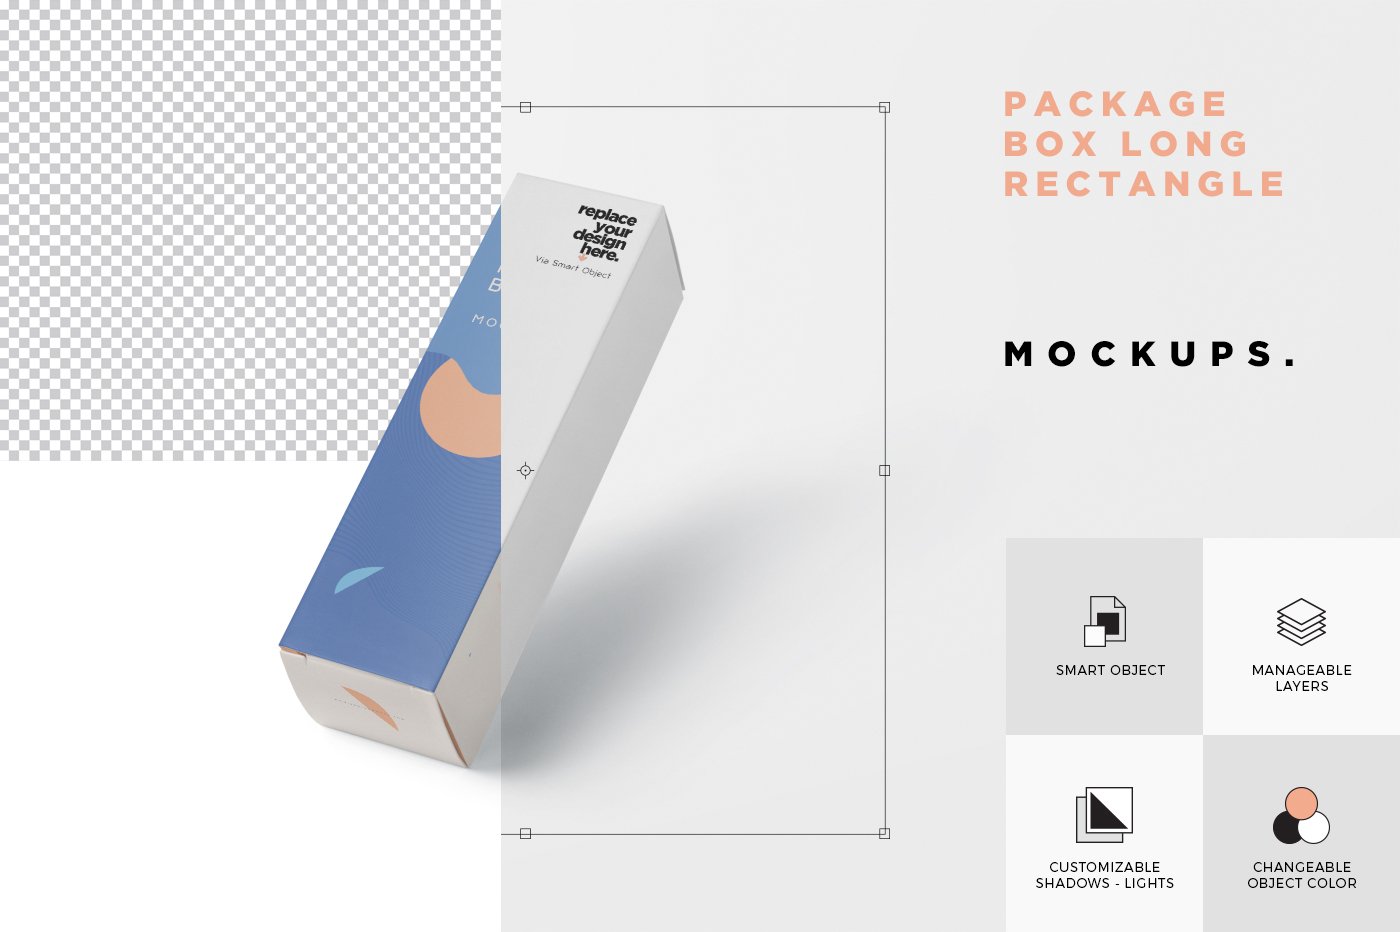 mockup features image 125 1